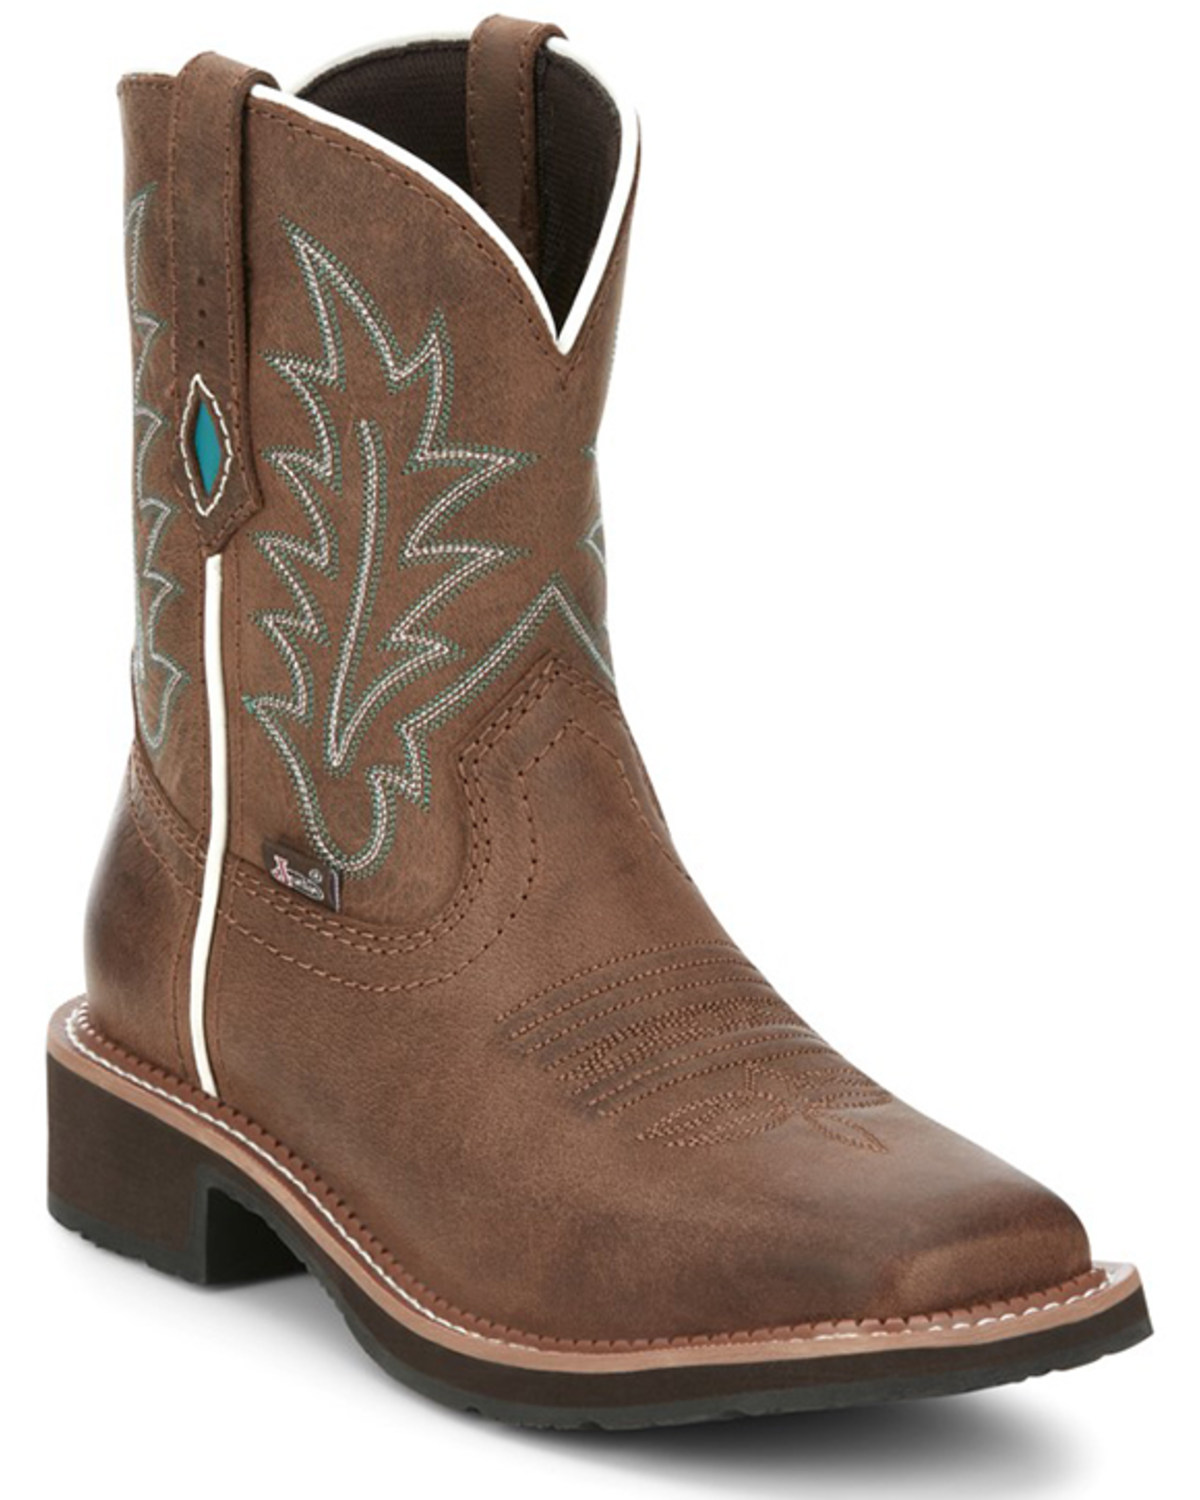 Justin Women's Ema Short Western Boots - Broad Square Toe